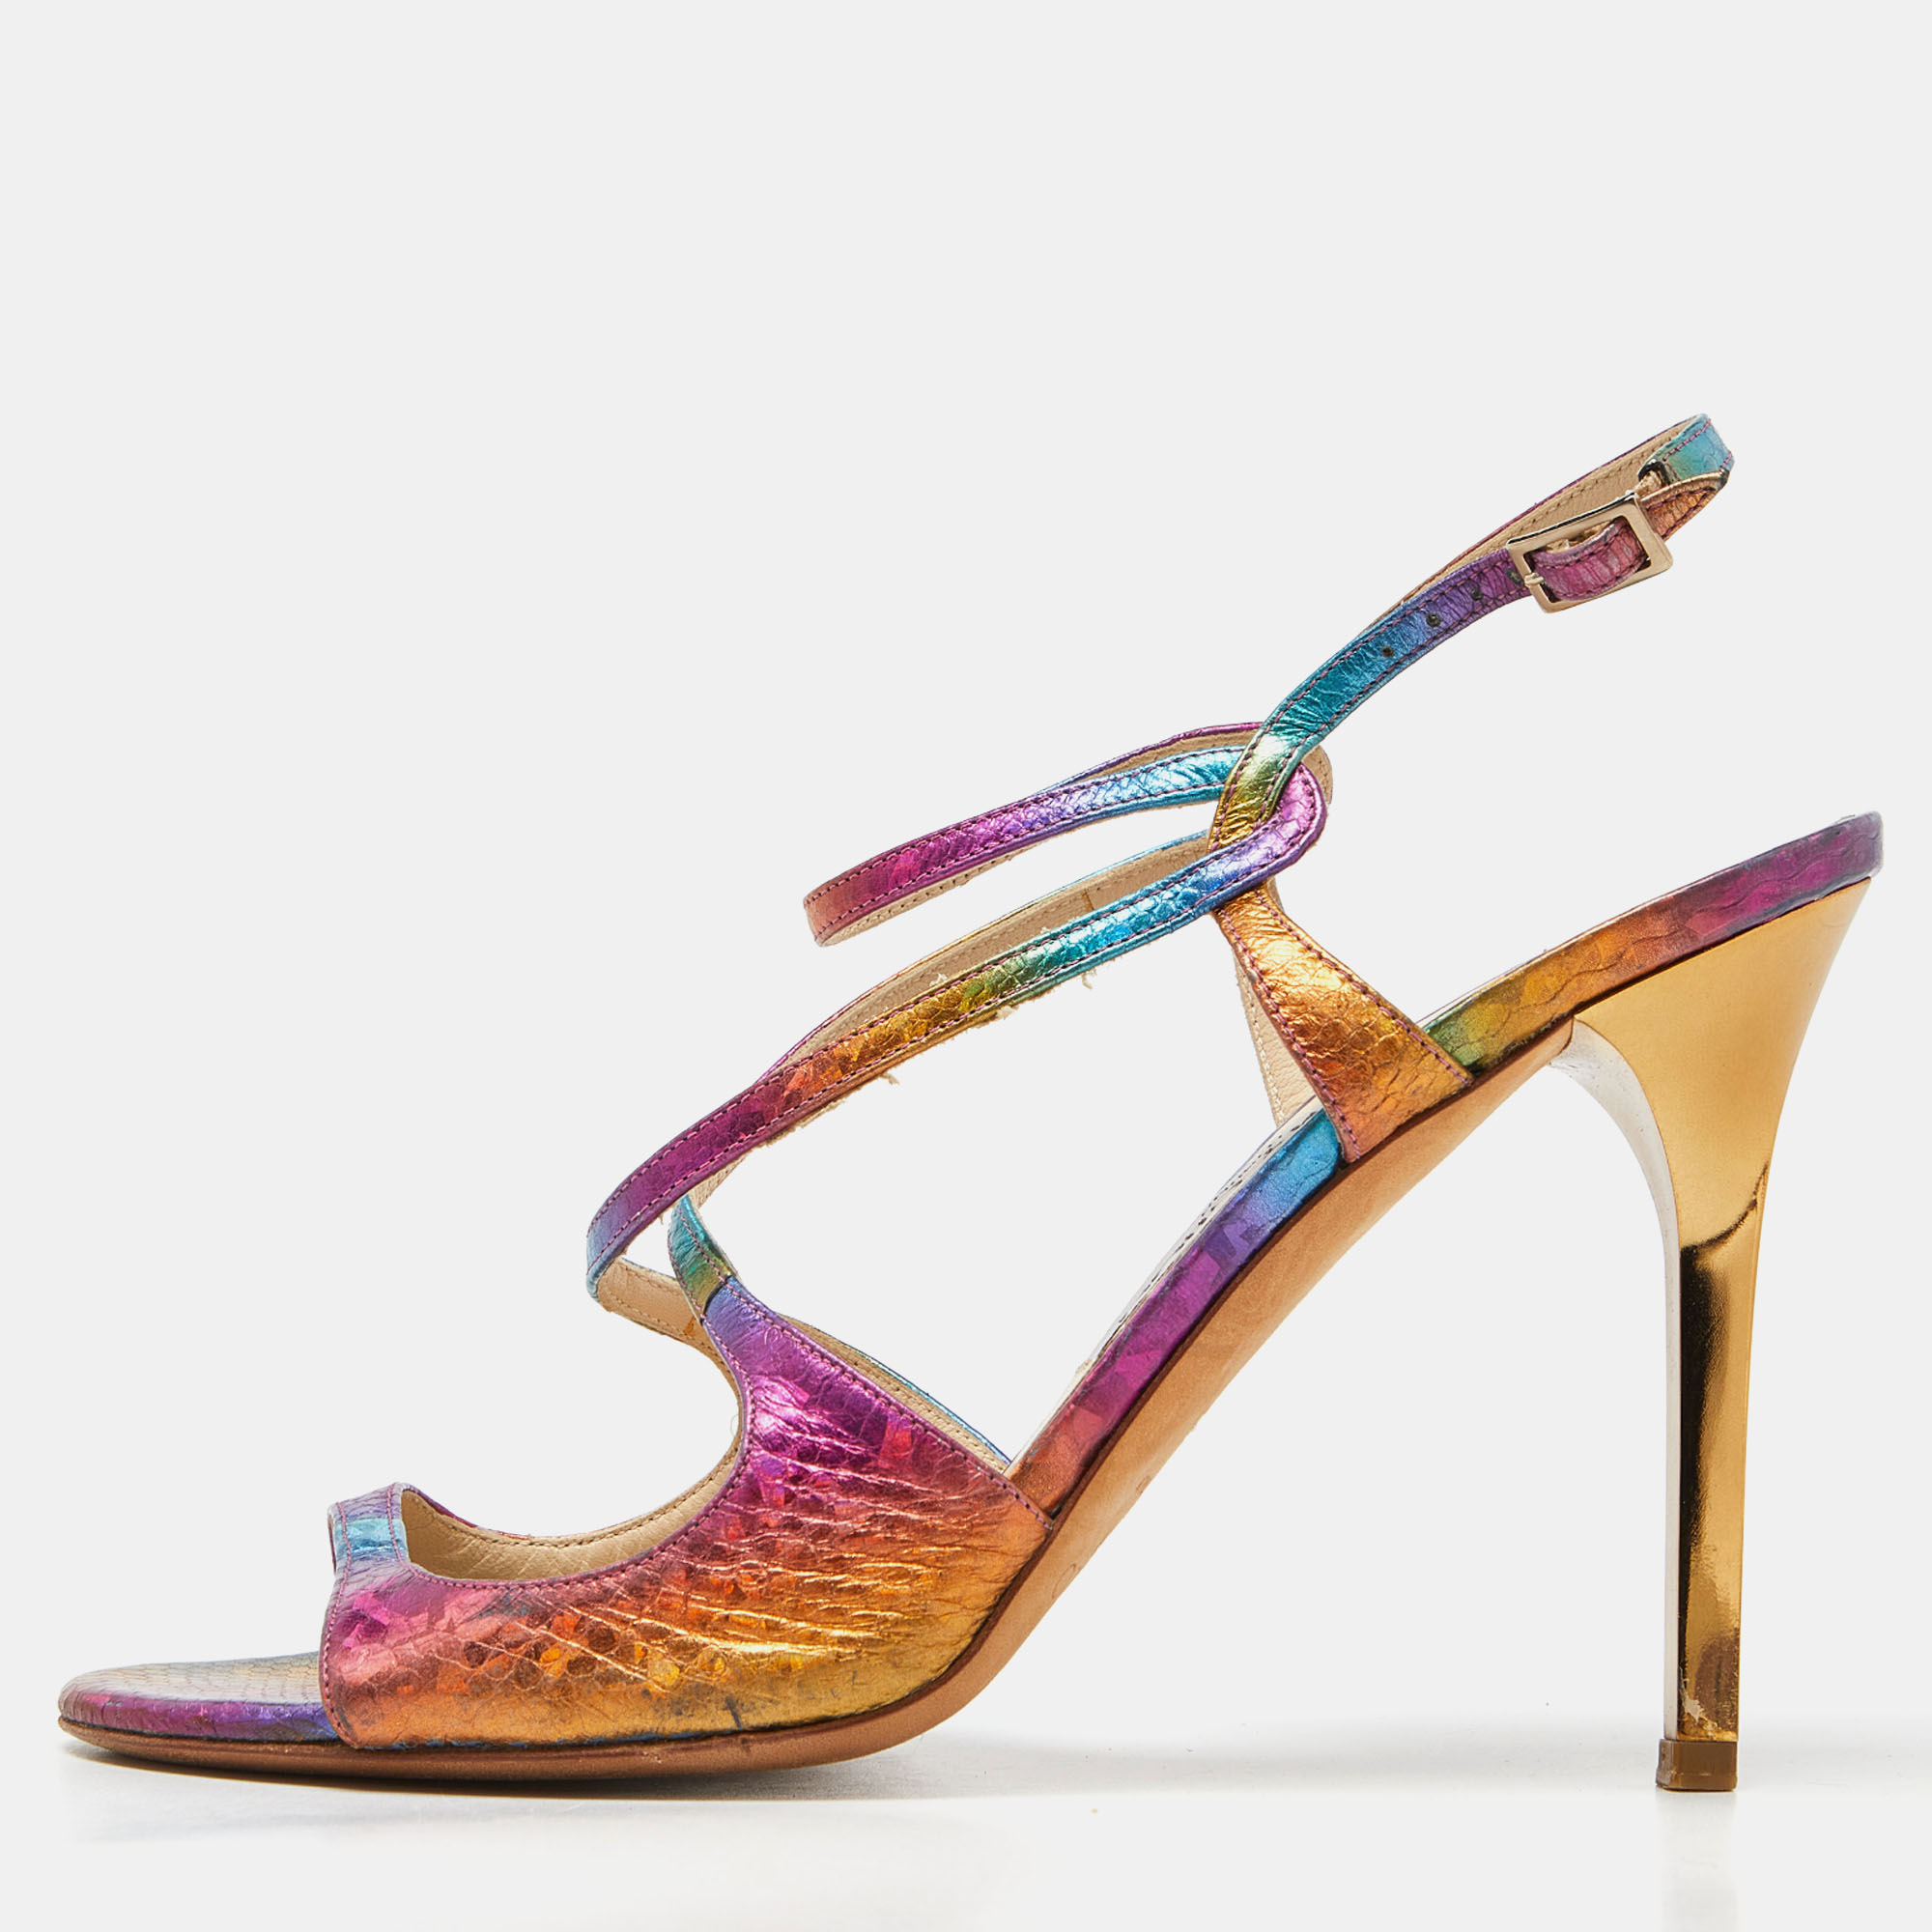 Pre-owned Jimmy Choo Multicolor Python Embossed Leather Criss Cross Strap Sandals Size 38